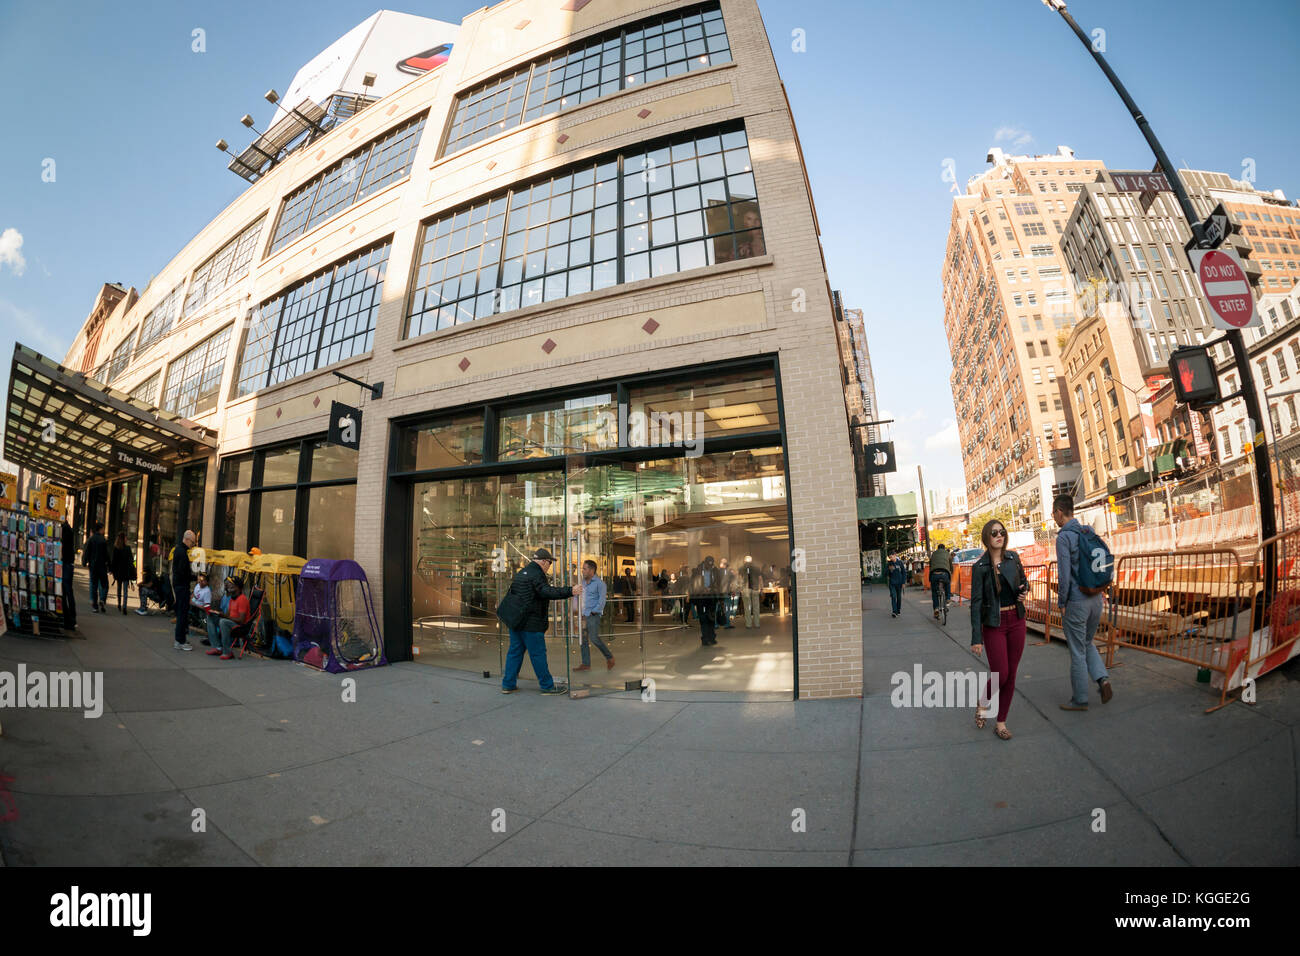 The Apple store in the Meatpacking District of New York on Thursday, November 2, 2017. Apple is scheduled to report fiscal fourth-quarter earnings after the close of trading on Thursday, a day in advance of the release of the iPhone X.   (© Richard B. Levine) Stock Photo